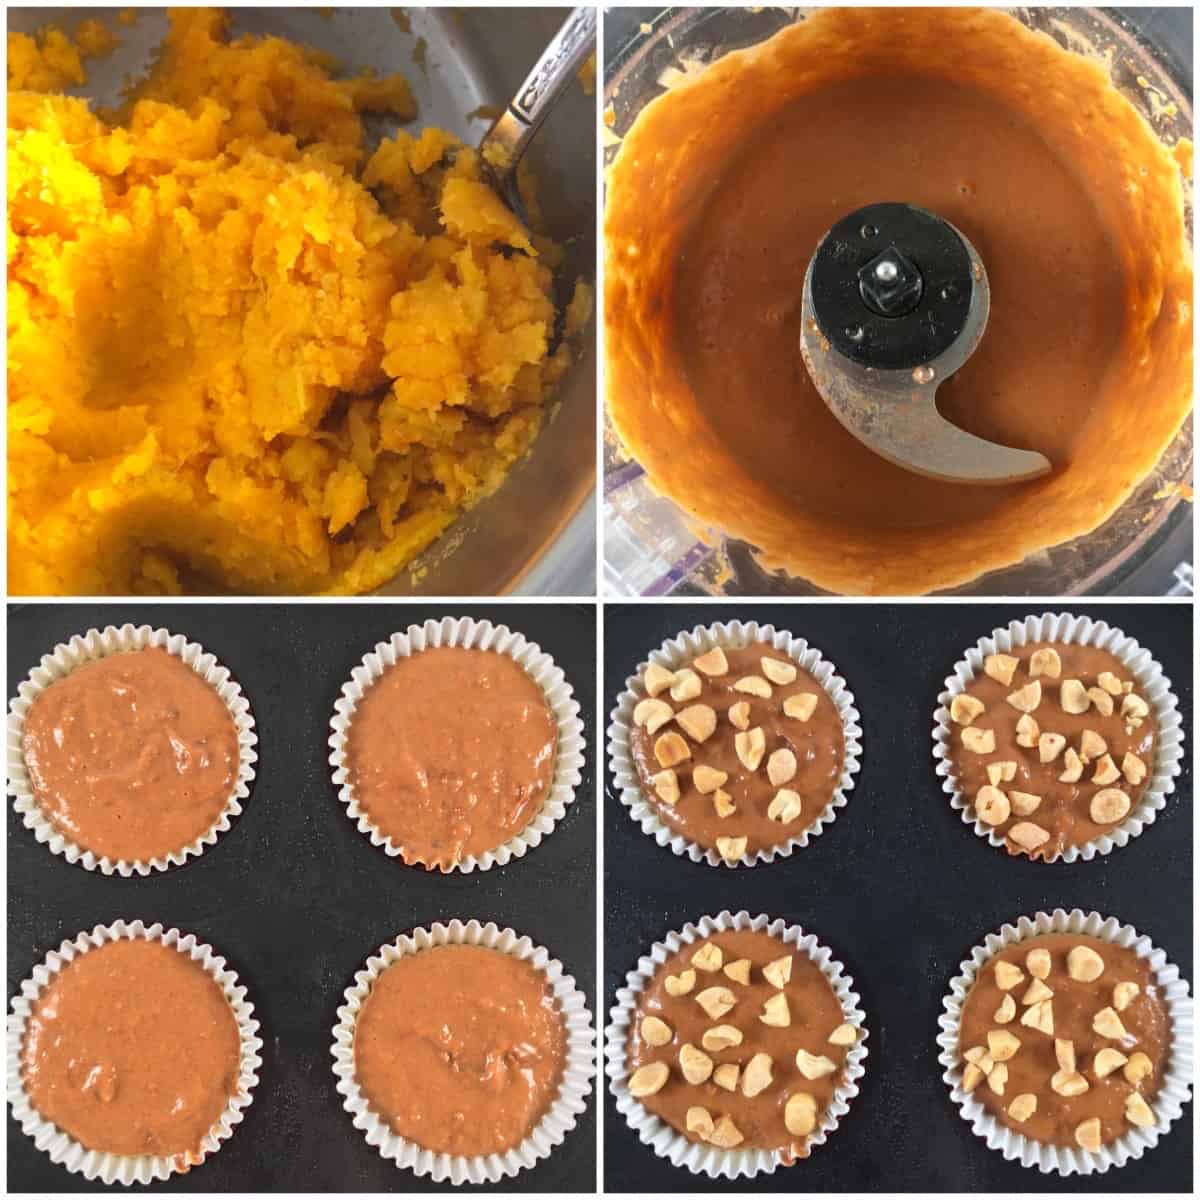 how to make chocolate peanut butter muffins